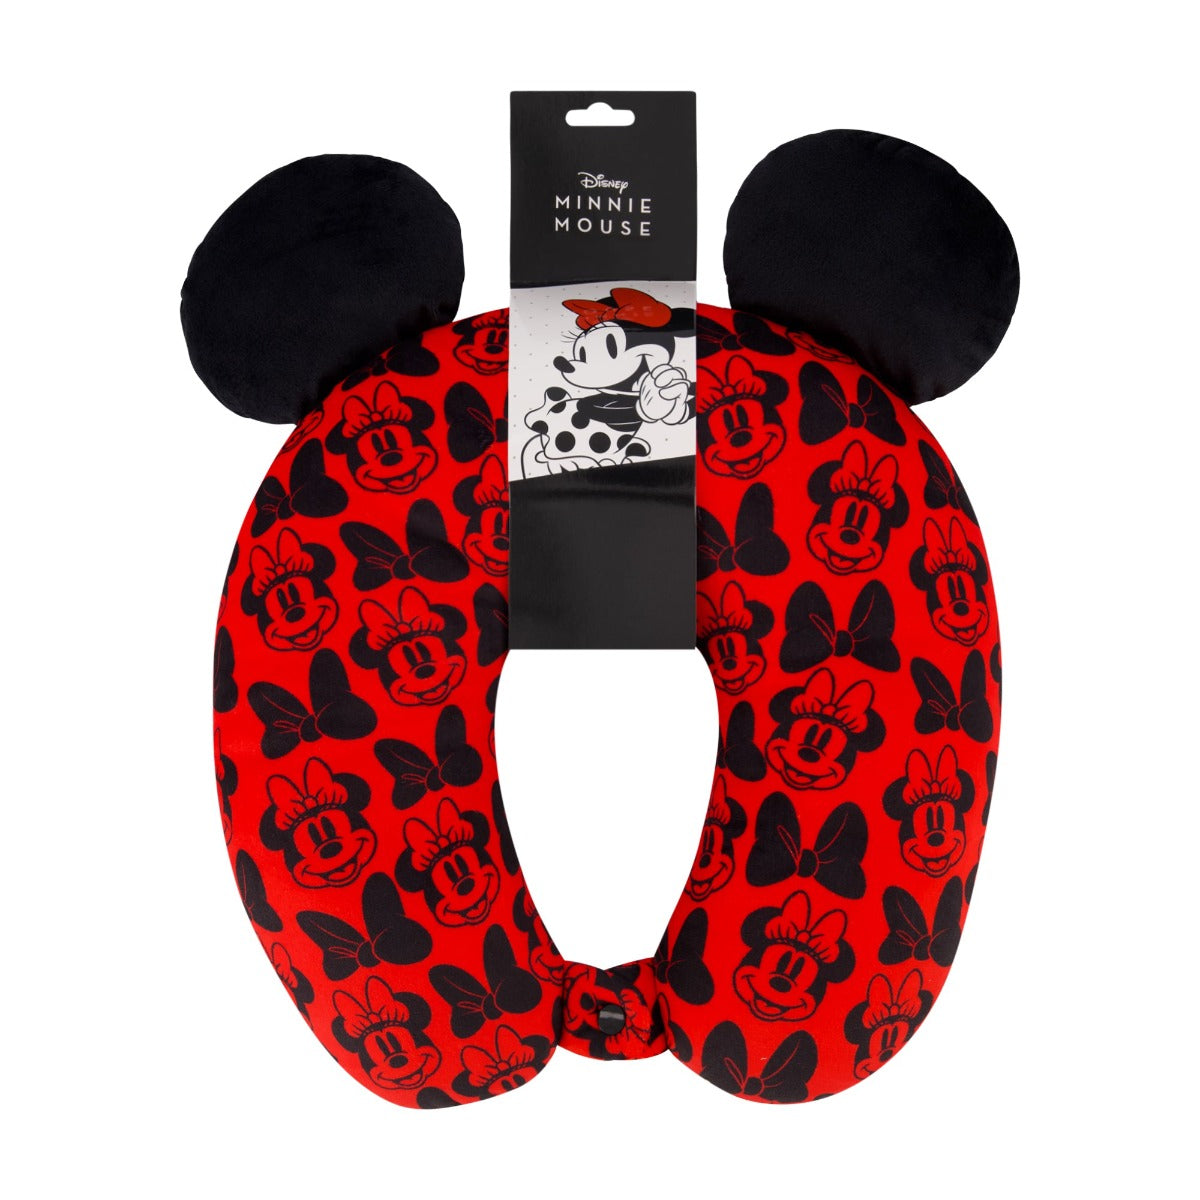 Ful disney minnie mouse red travel pillow with ears - best comfortable traveling neck pillows 